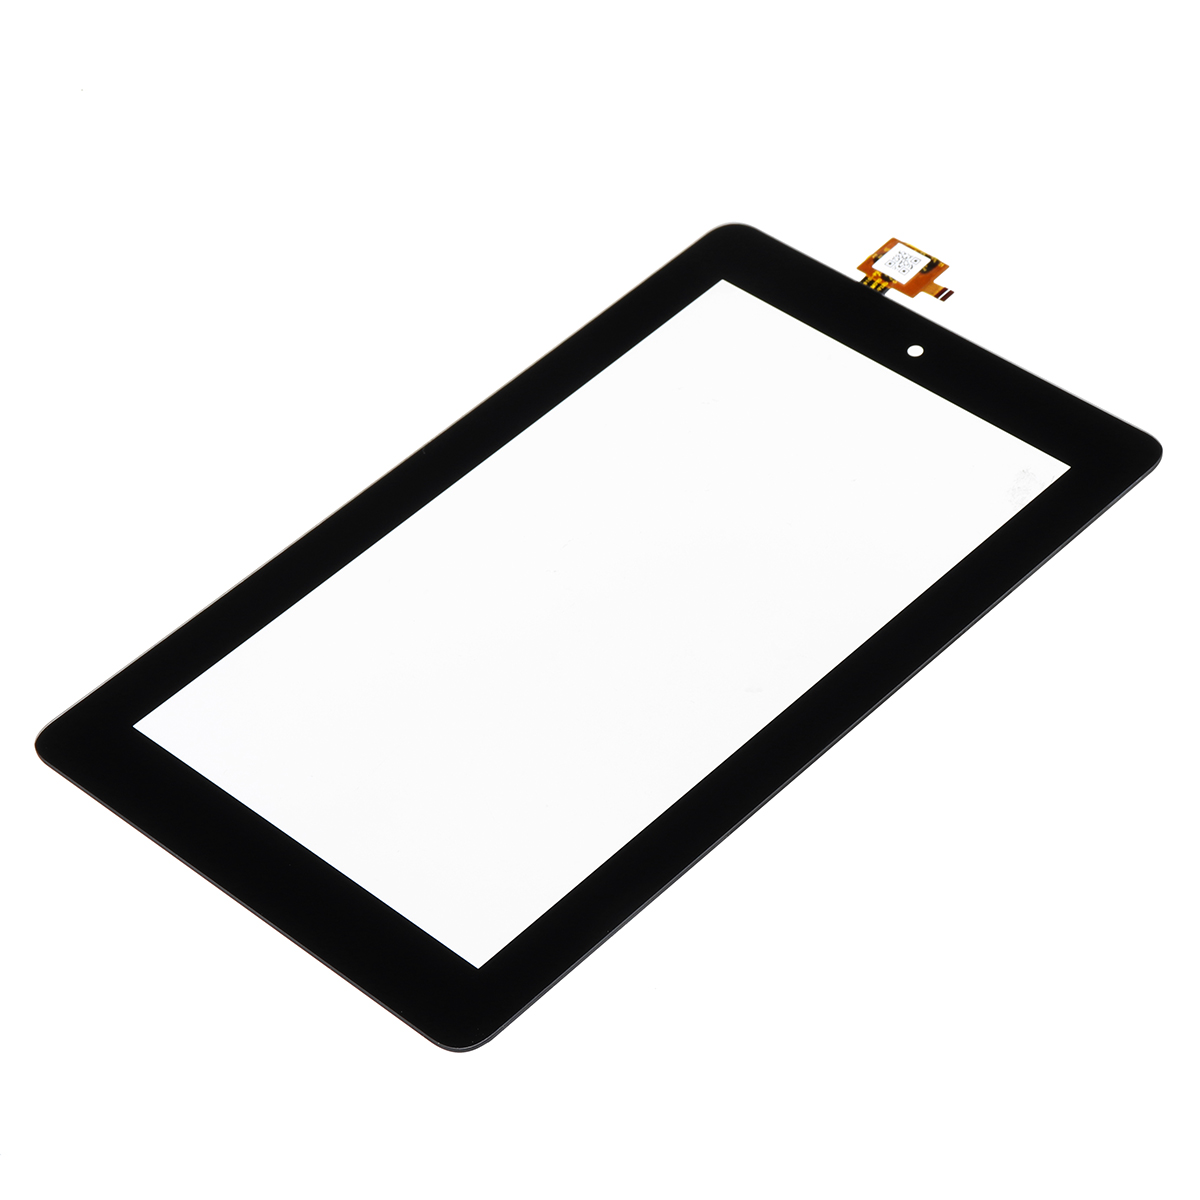 7-Inch-LCD-Touch-Screen-Digitizer--Polarizer-For-Amazon-Kindle-Fire-HD-5th-Gen-SV98LN-Replacement-Re-1323173